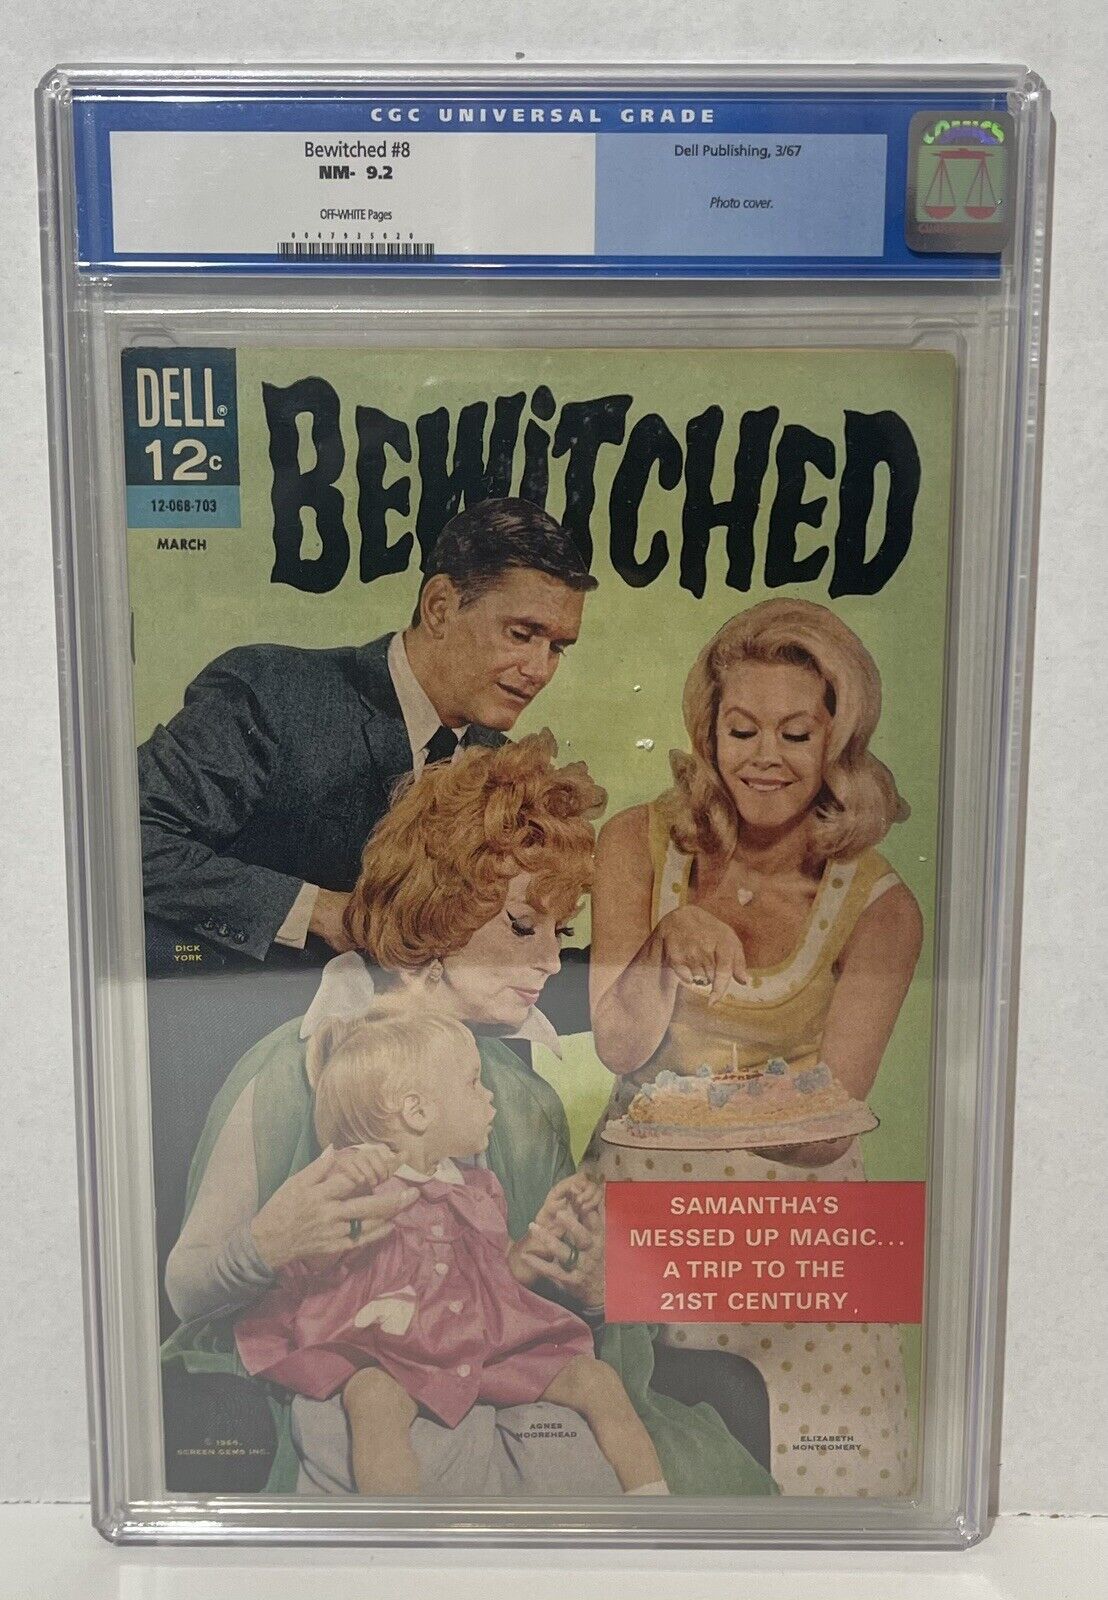 Bewitched #8 Dell Publishing, 3/67 CGC 9.2